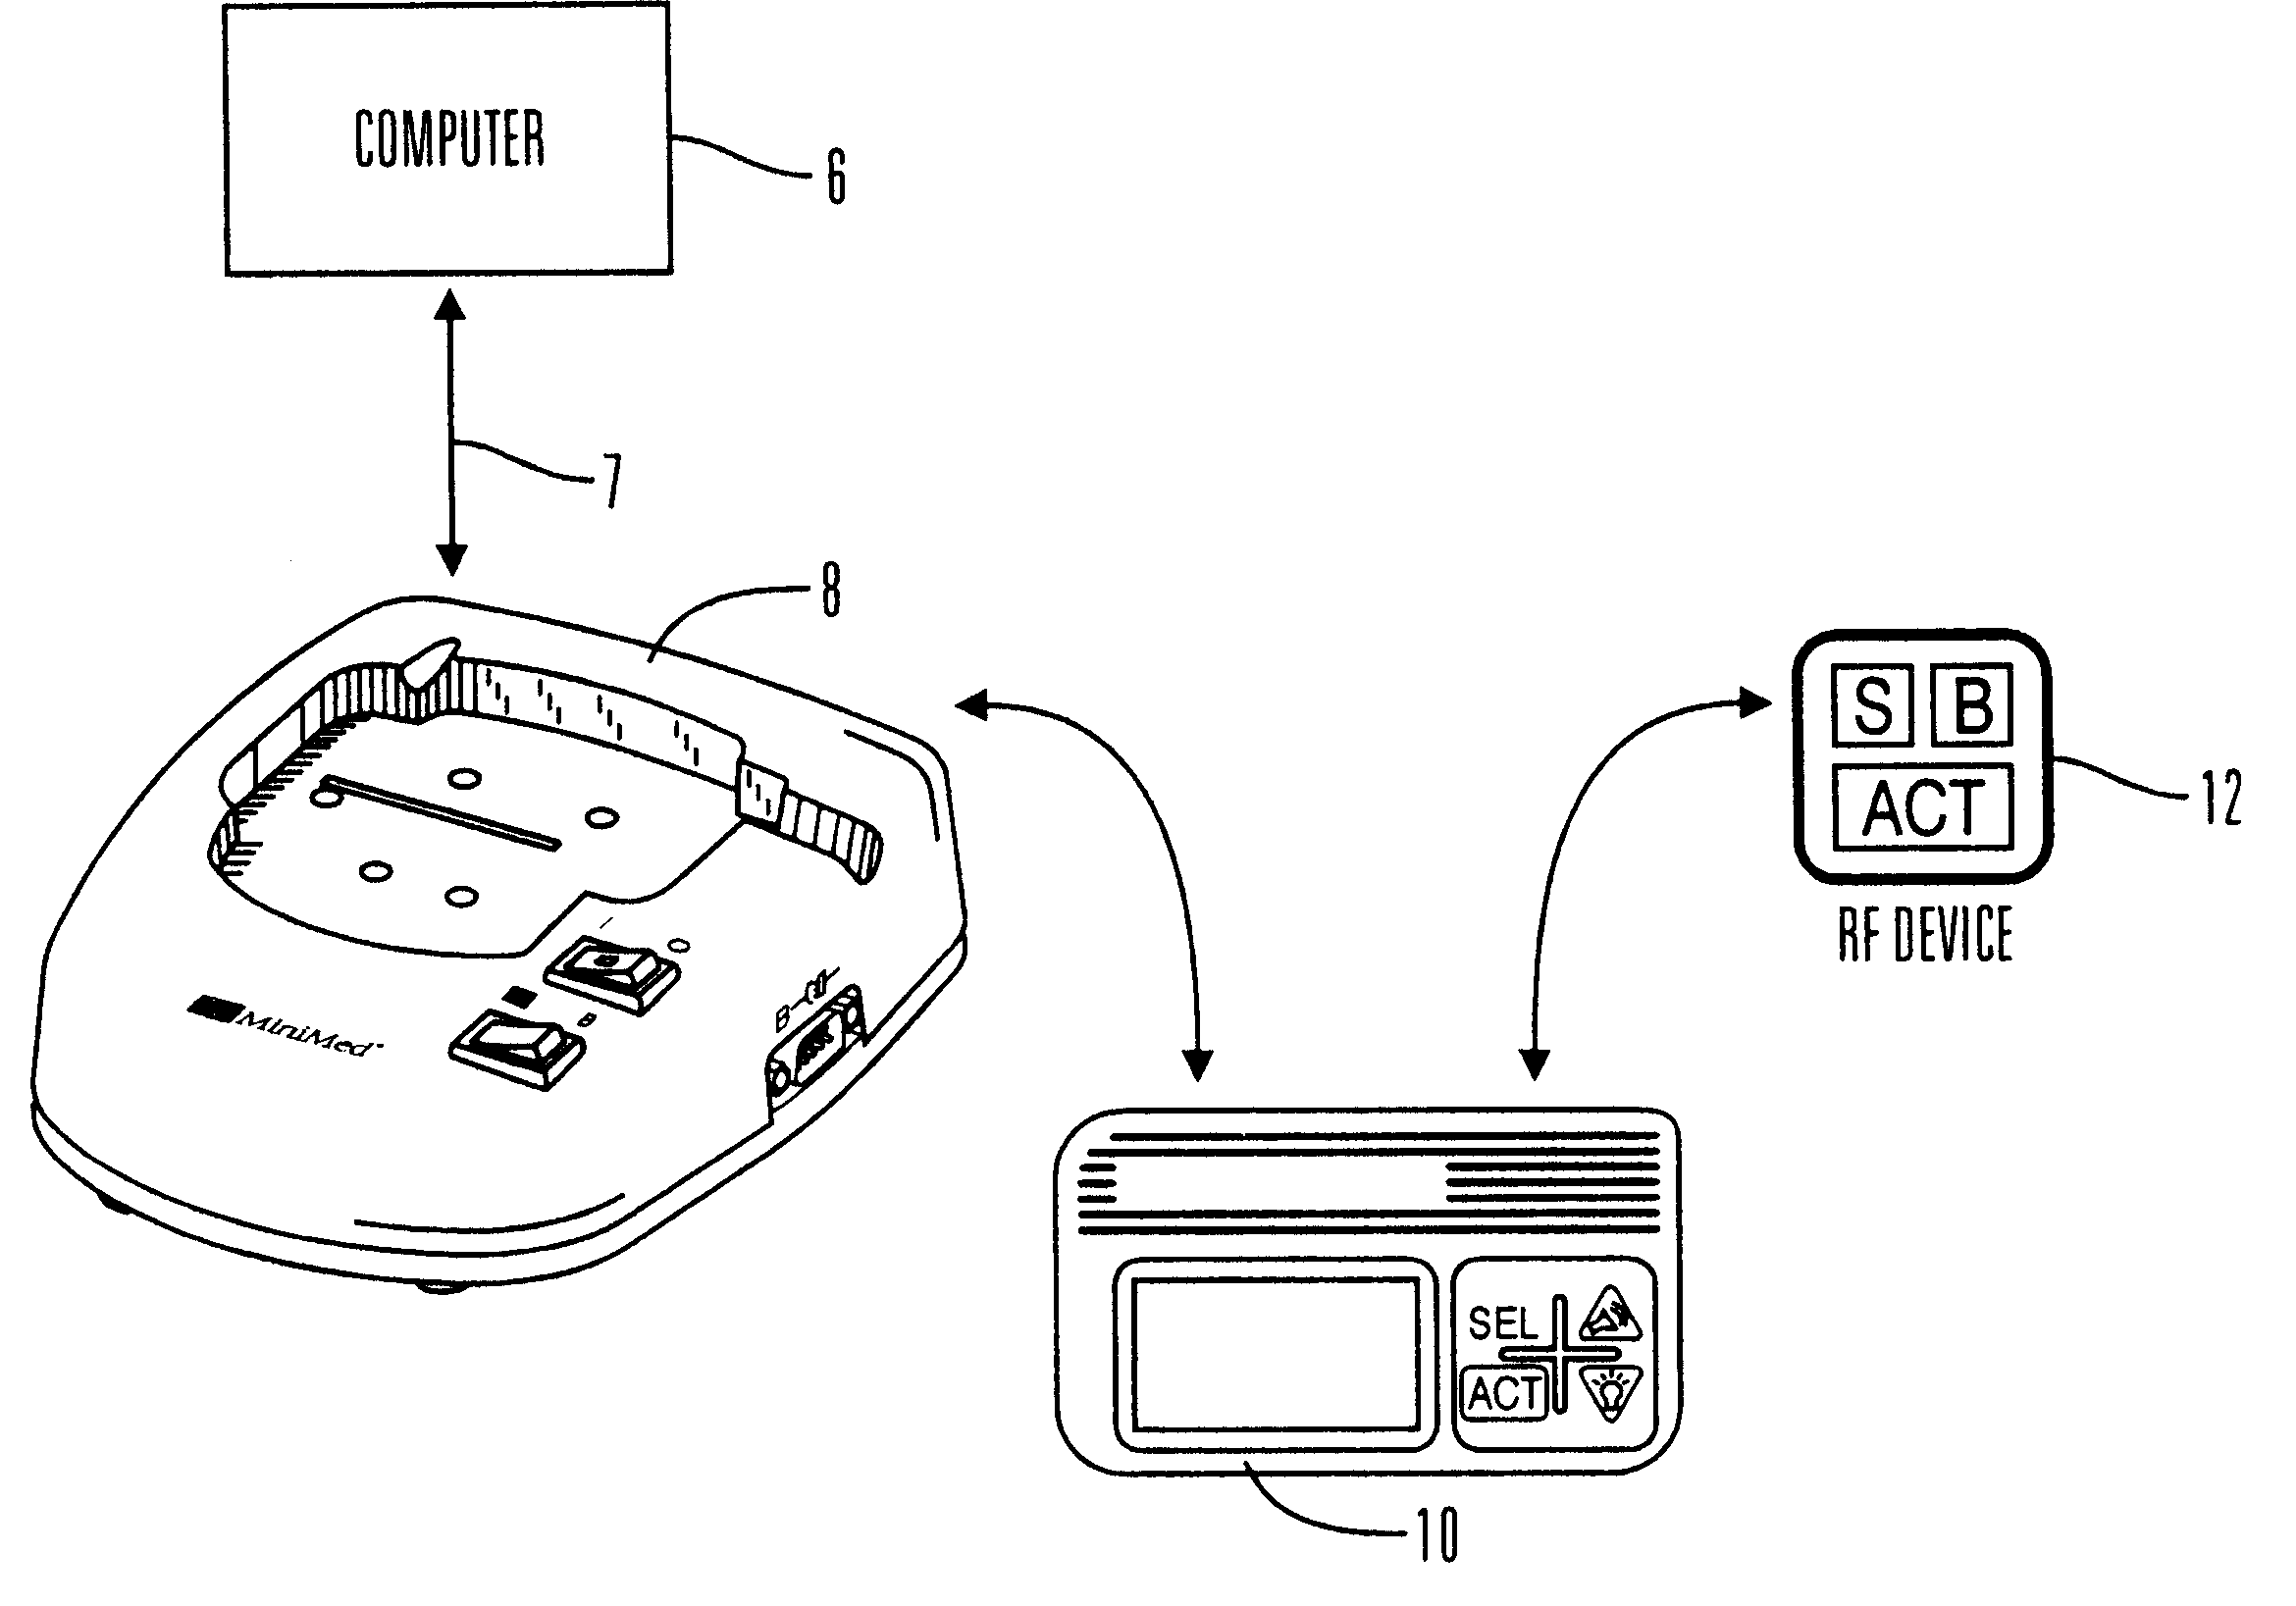 External infusion device with remote programming bolus estimator and/or vibration alarm capabilities